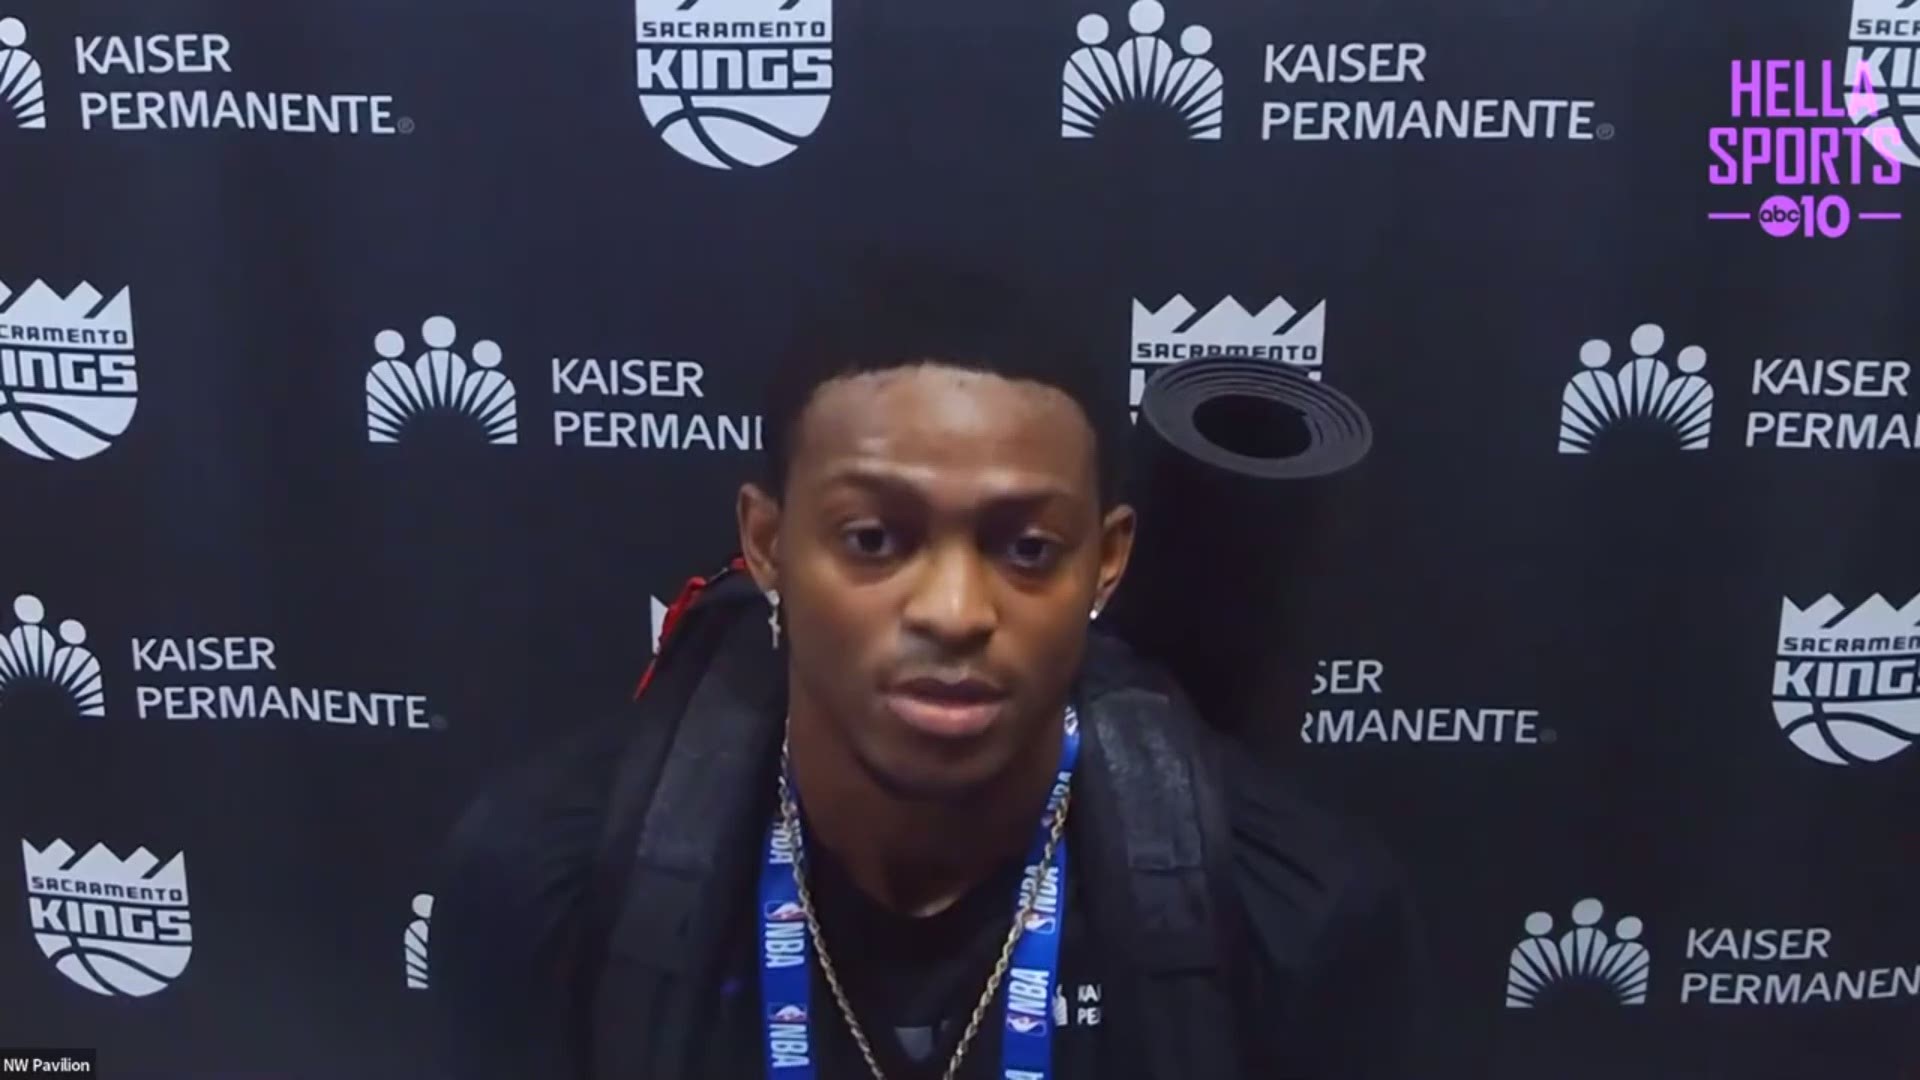 Kings PG De'Aaron Fox says he's ready to resume the NBA season on Friday when Sacramento faces the San Antonio Spurs and hopes to end the 13 year playoff drought.